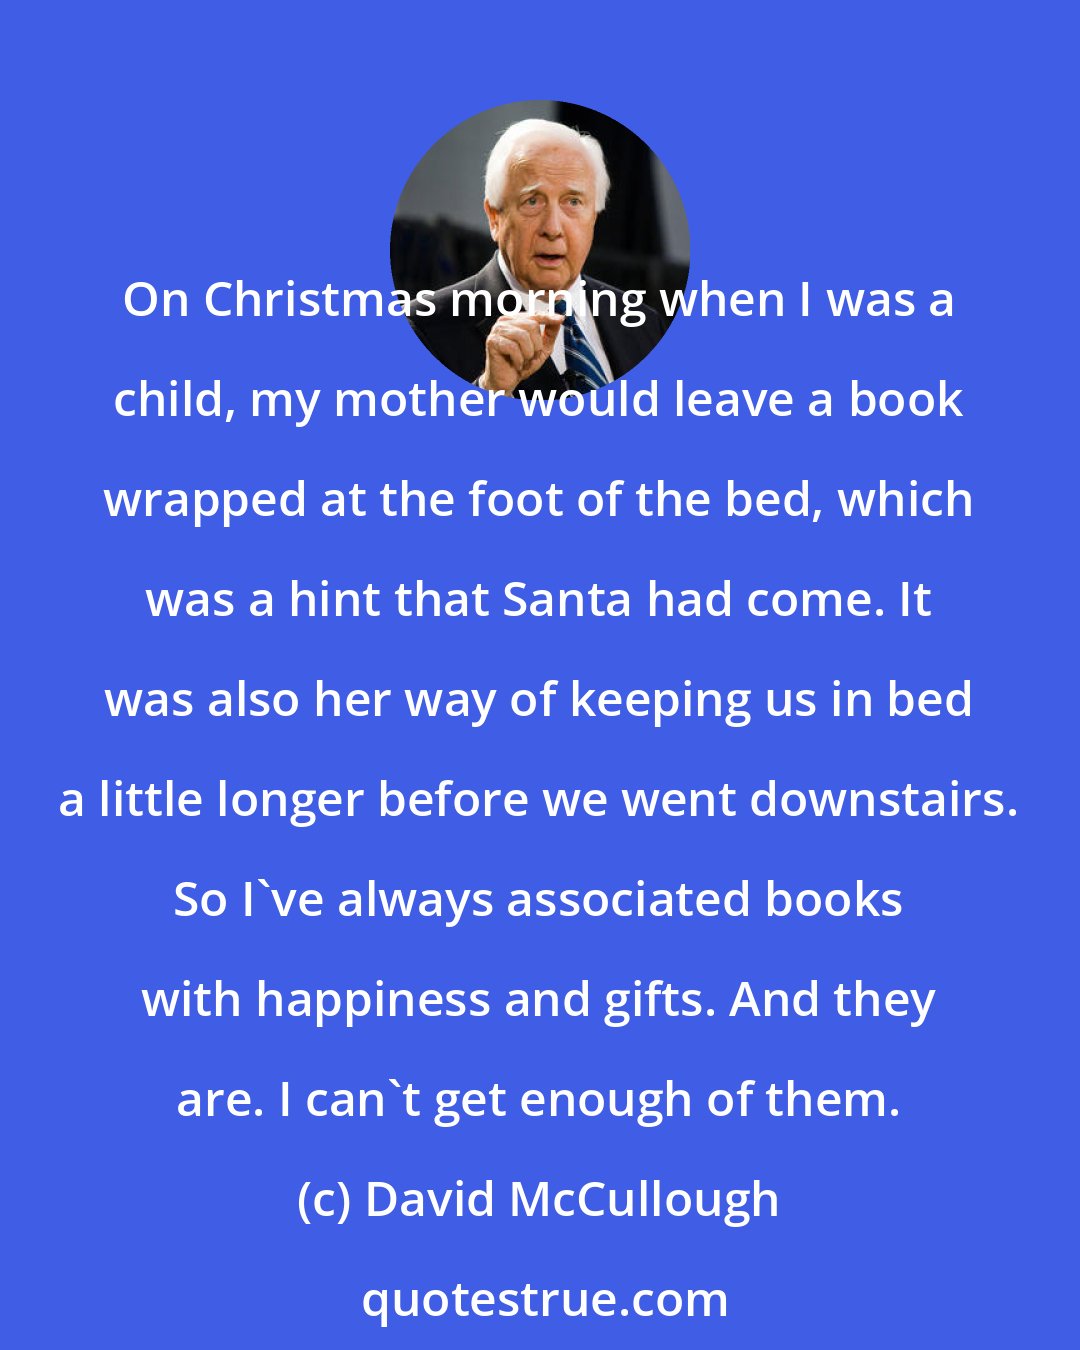 David McCullough: On Christmas morning when I was a child, my mother would leave a book wrapped at the foot of the bed, which was a hint that Santa had come. It was also her way of keeping us in bed a little longer before we went downstairs. So I've always associated books with happiness and gifts. And they are. I can't get enough of them.